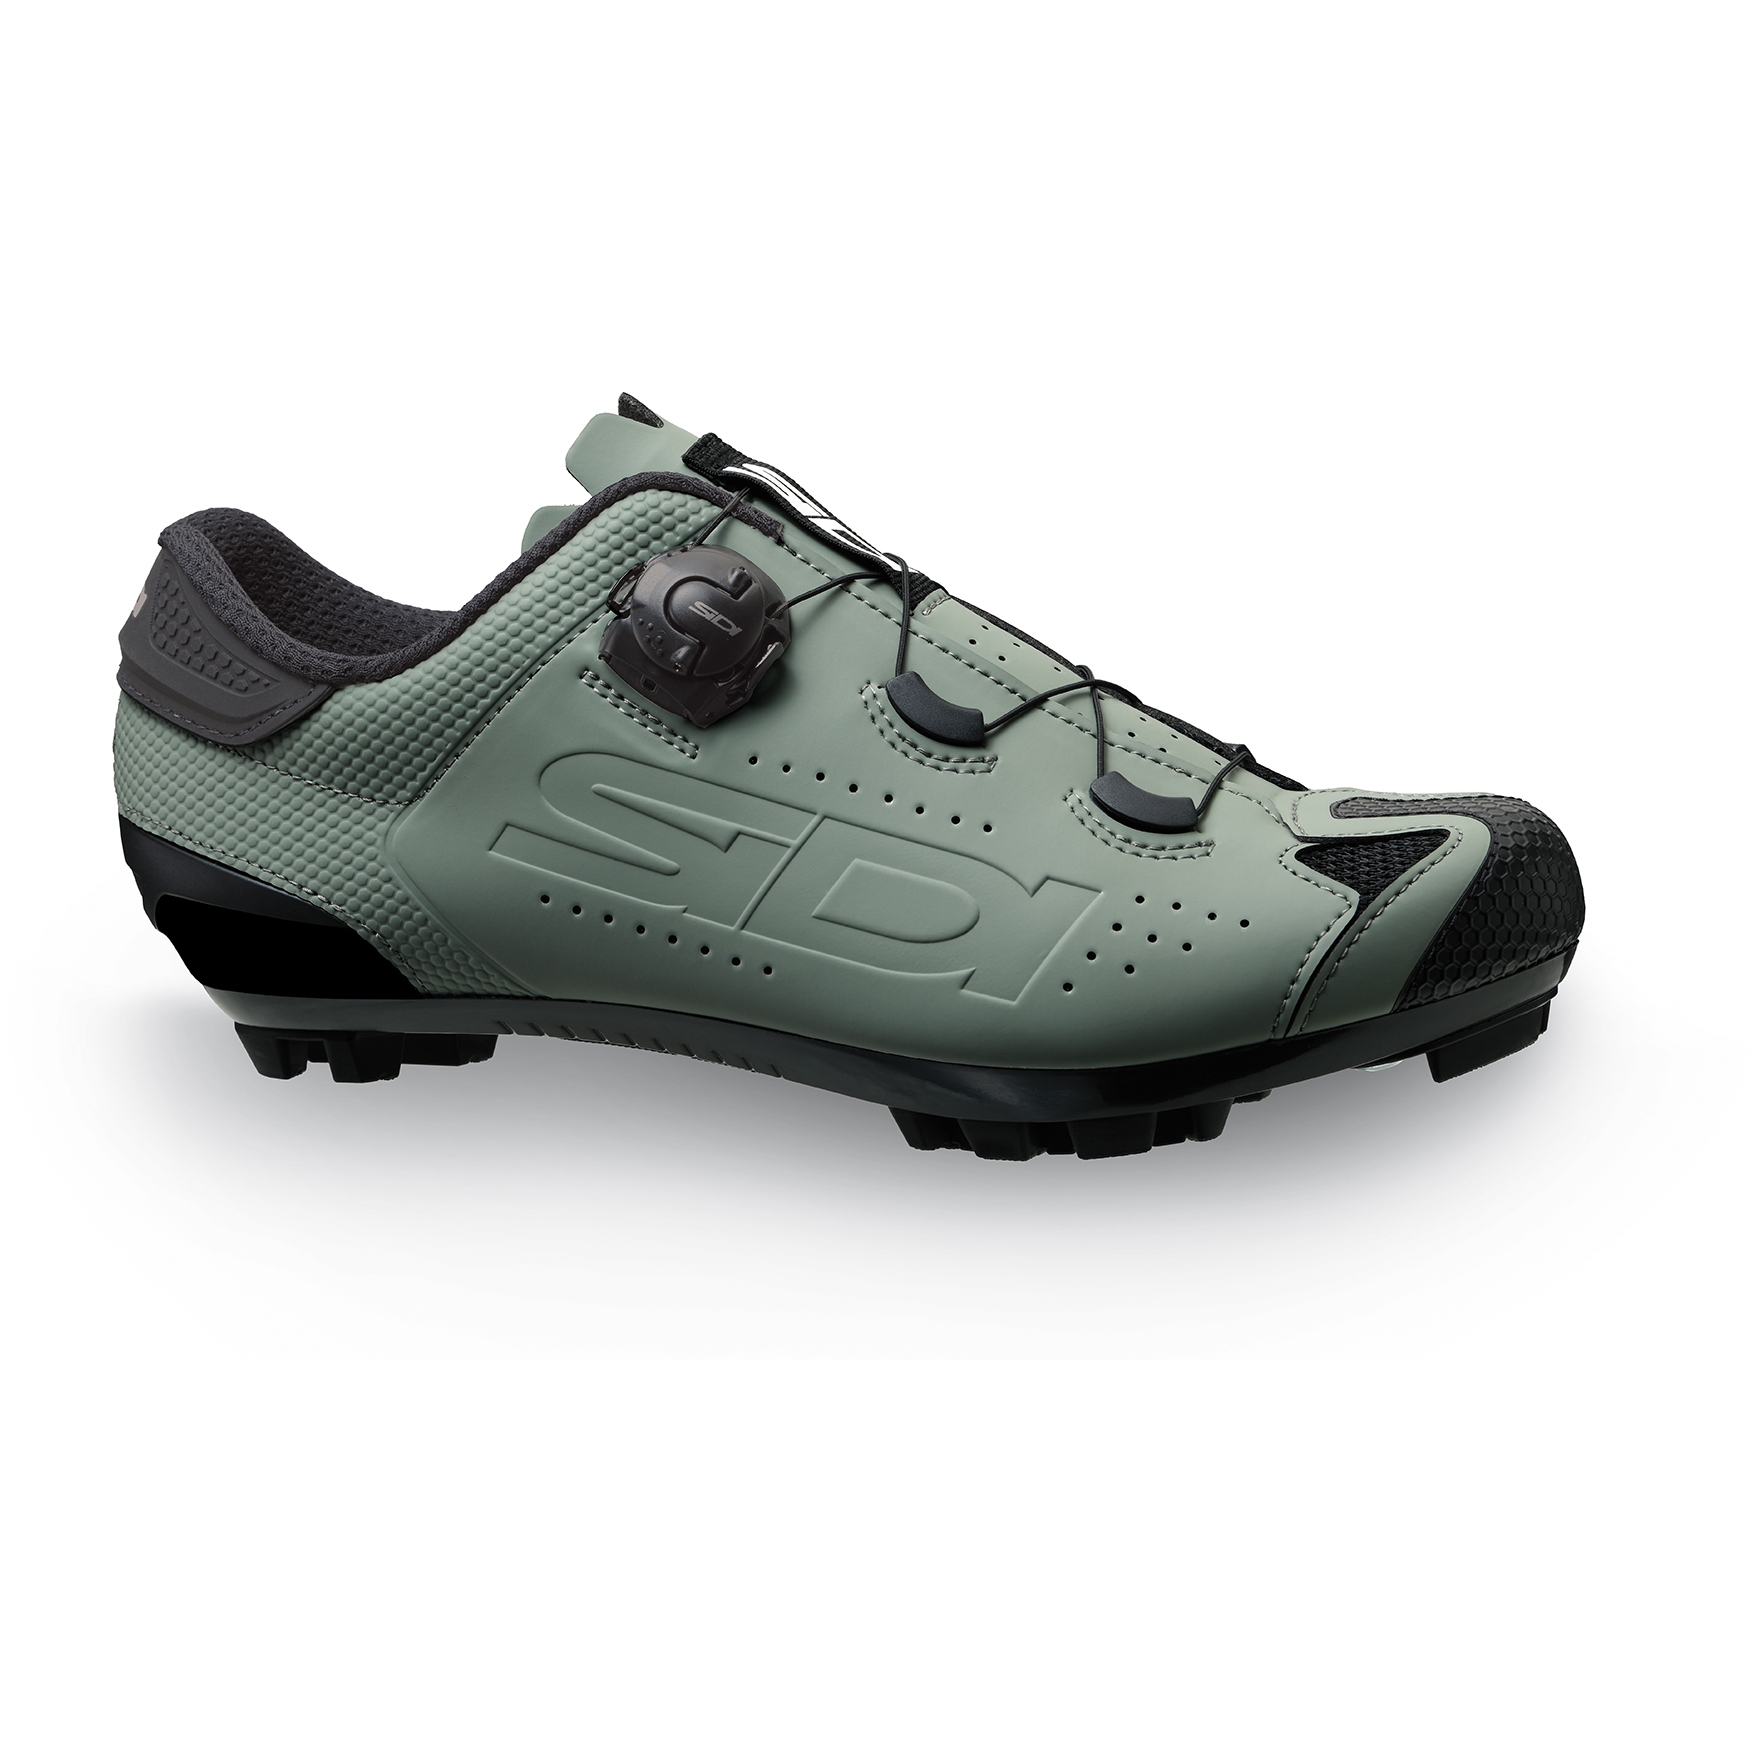 Picture of Sidi MTB Dust Gravel Shoes - Sage